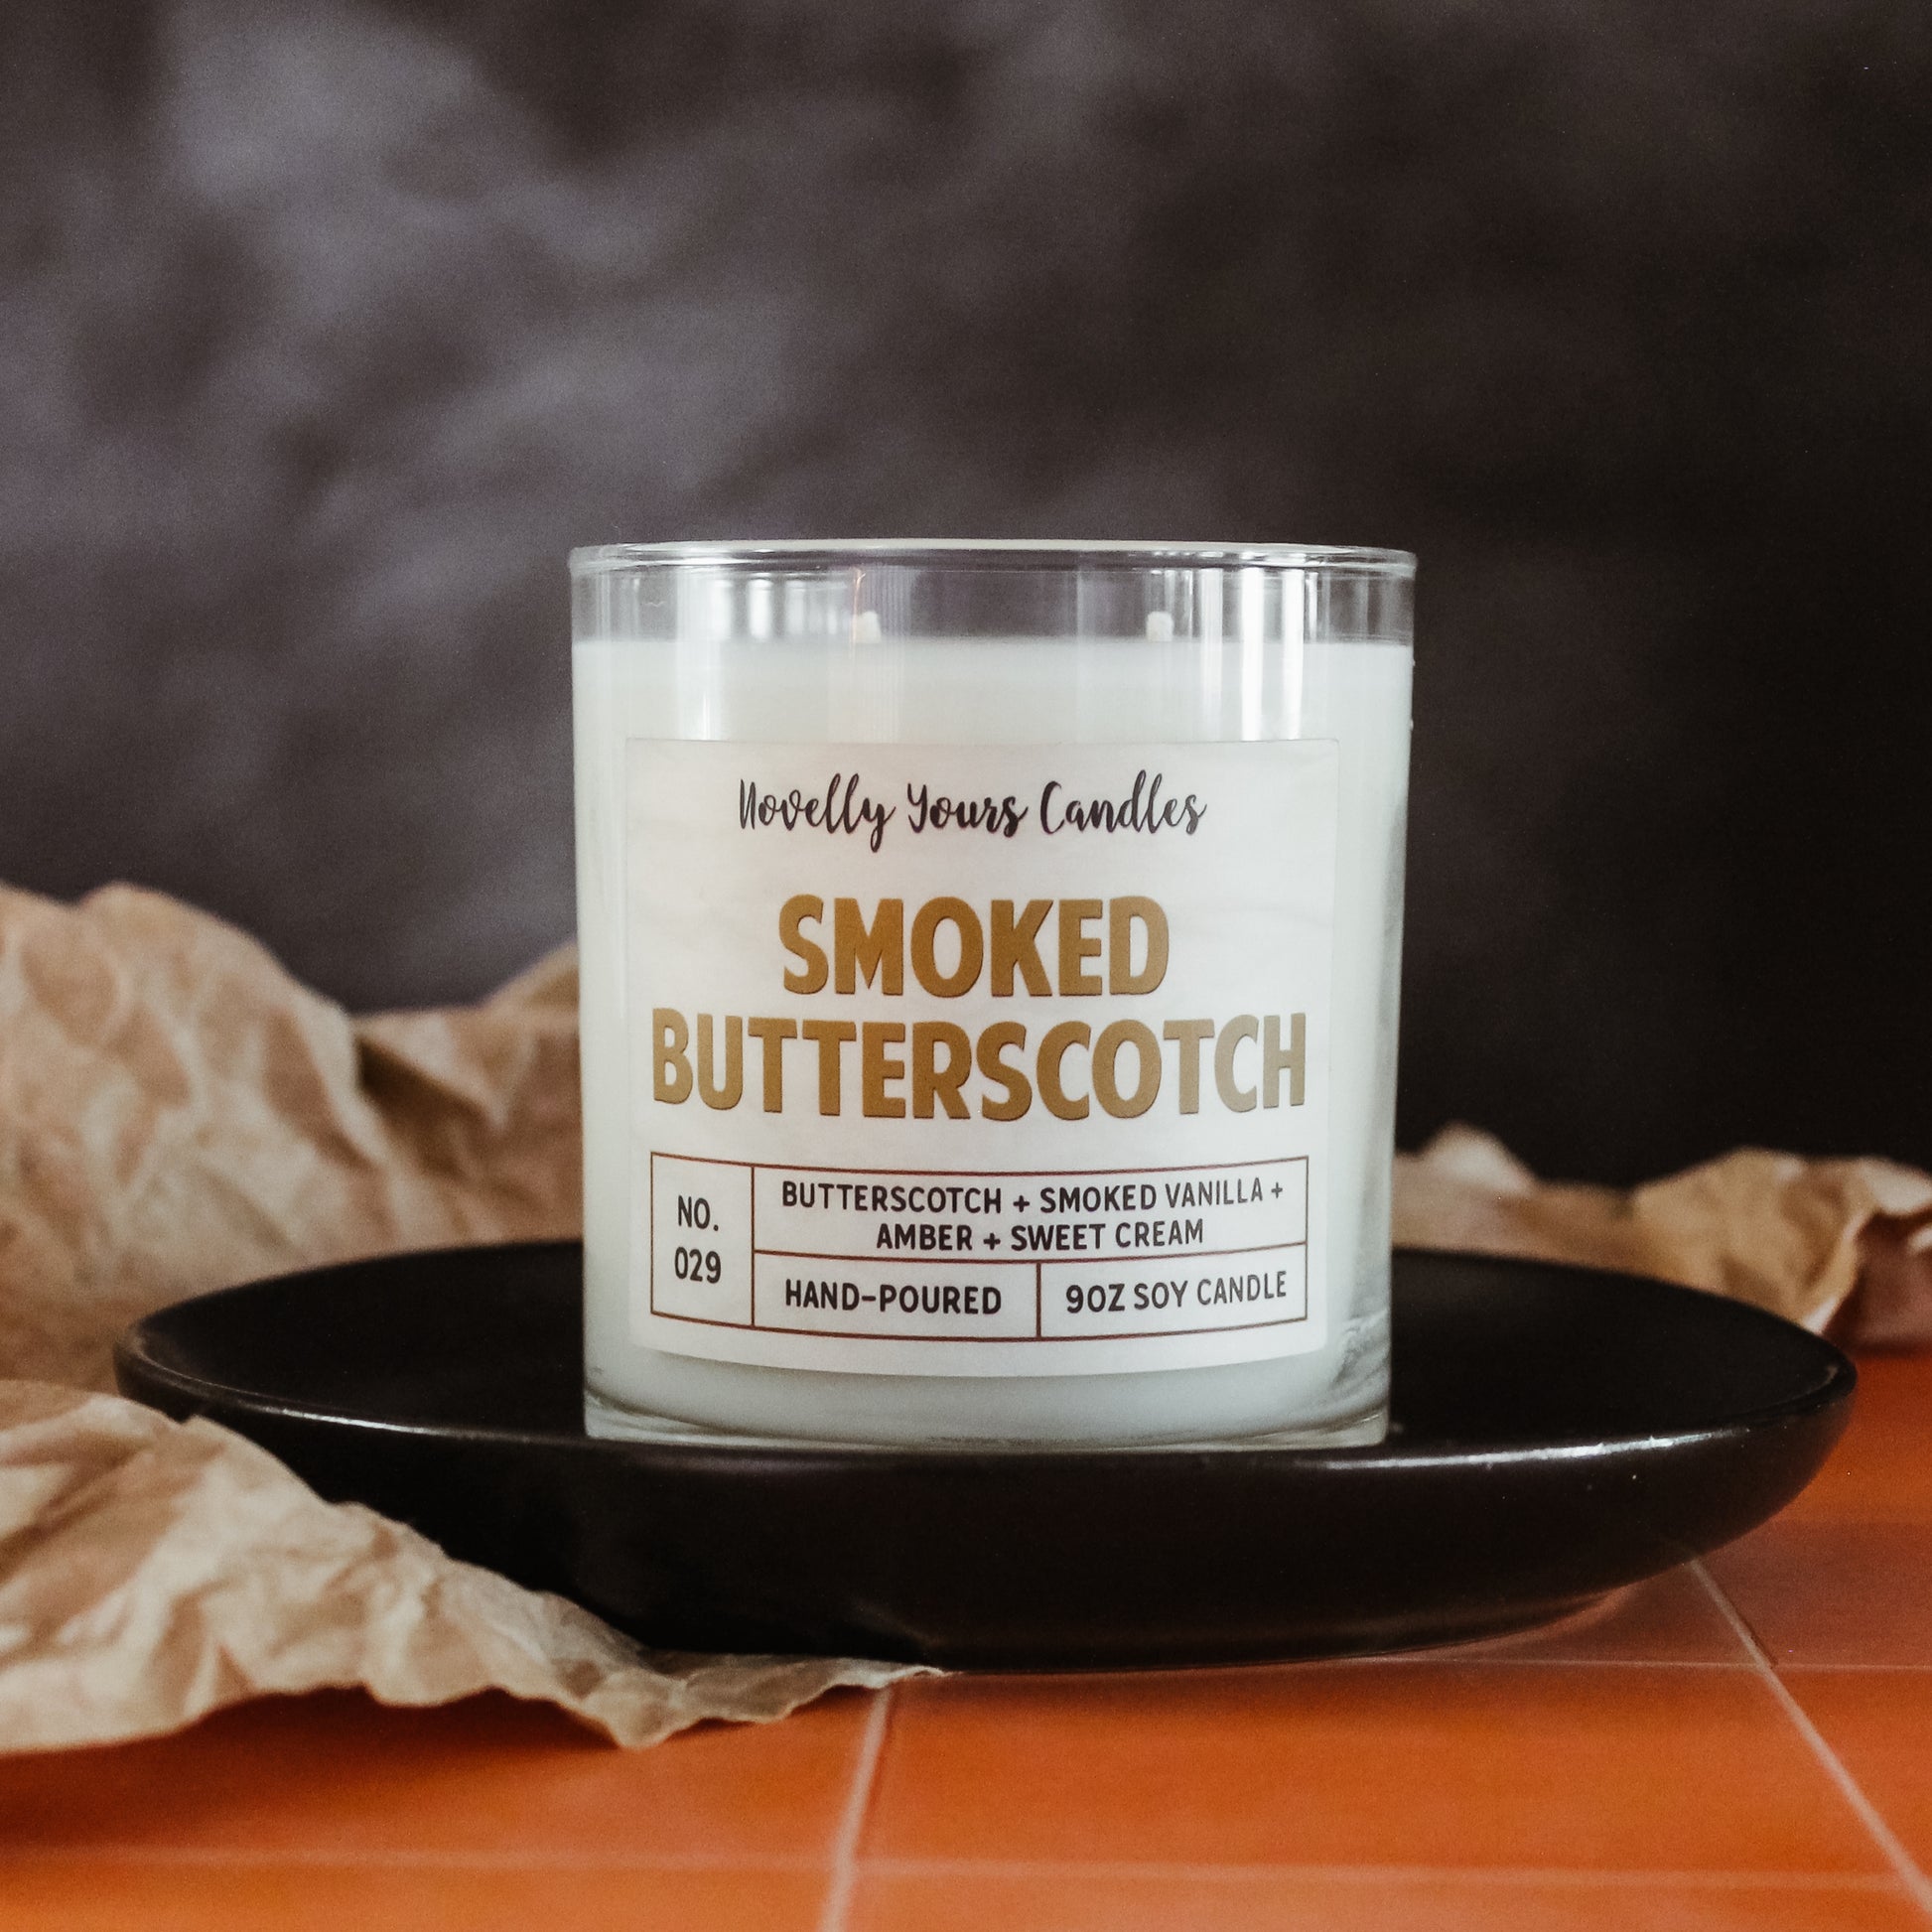 smoked butterscotch scented candle with butterscotch colored text. candle is in clear glass tumbler jar with lid off. Candle sits on round black plate which is on top of orange tiled countertop with smoky black background. brown Kraft paper accents the scene.